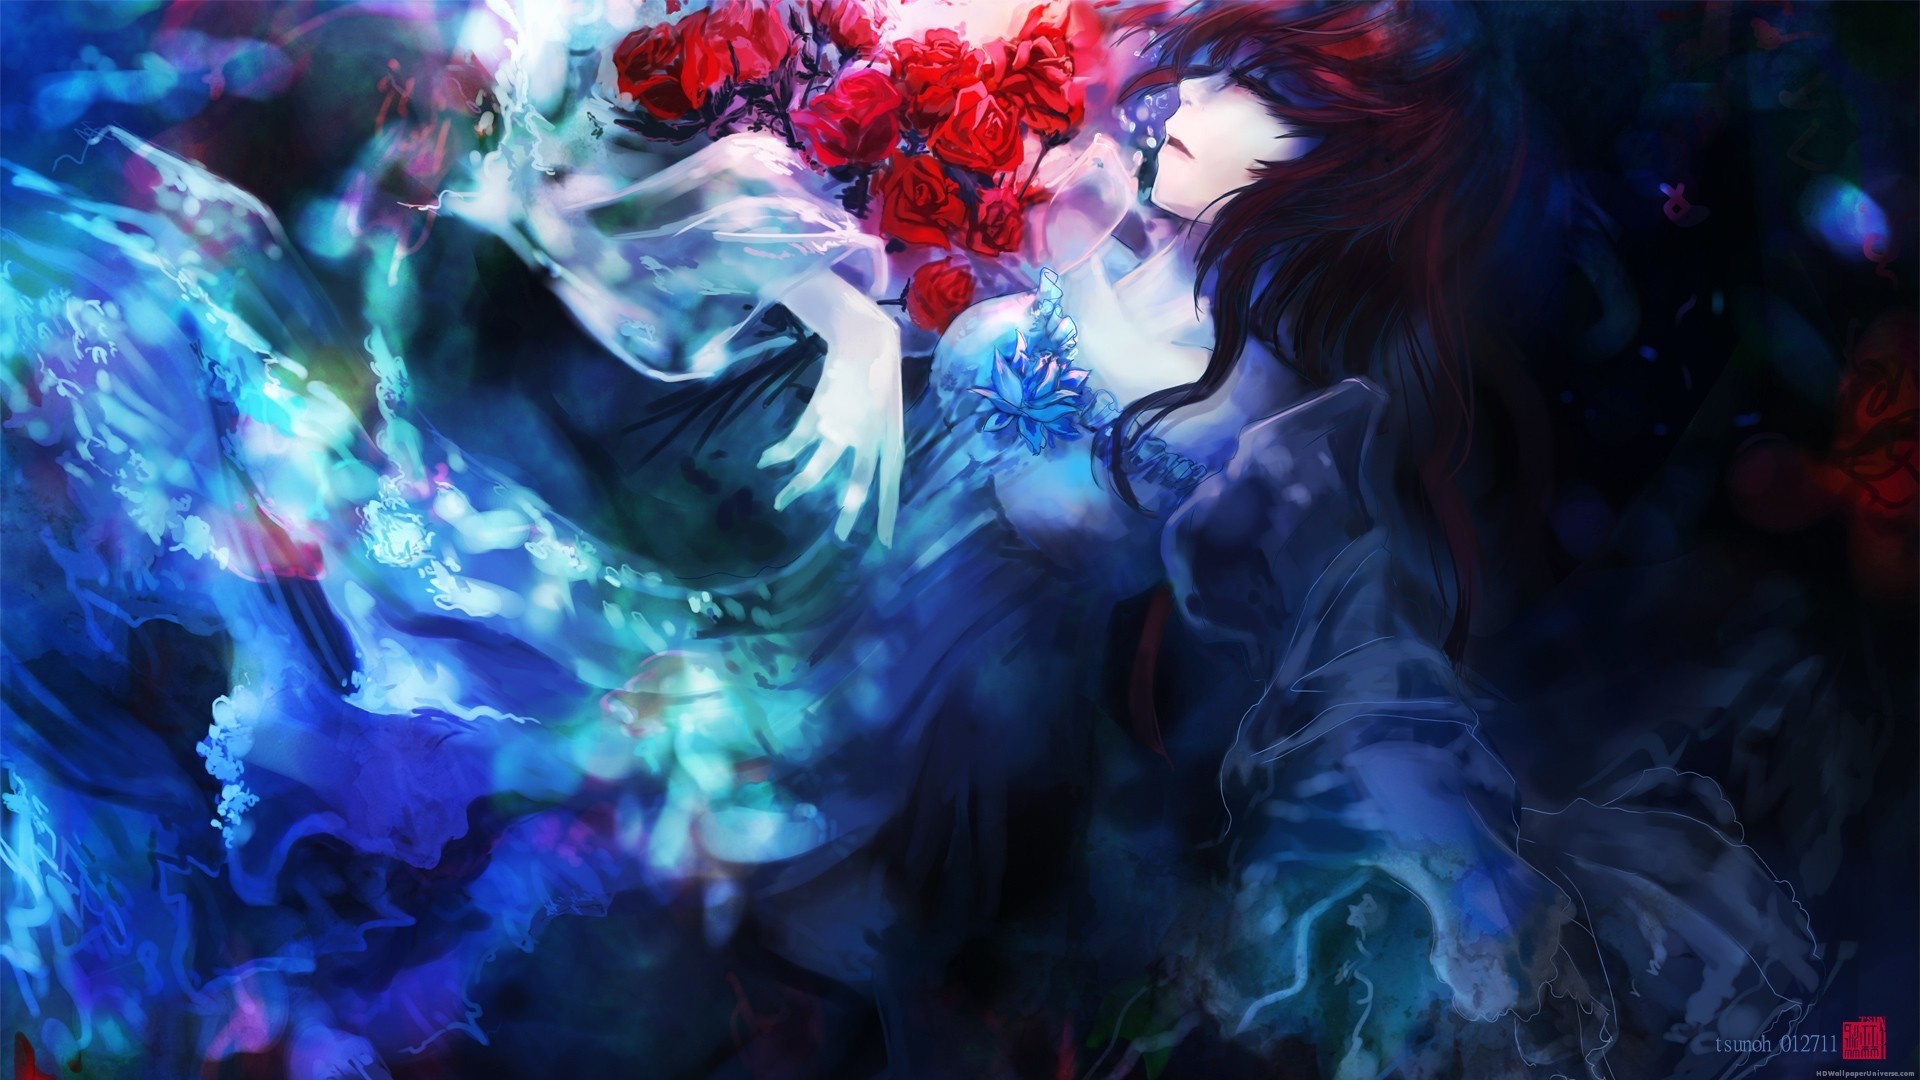 1920x1080 Gothic anime girl red roses HD Wallpaper - http://www.hdwallpaperuniverse.